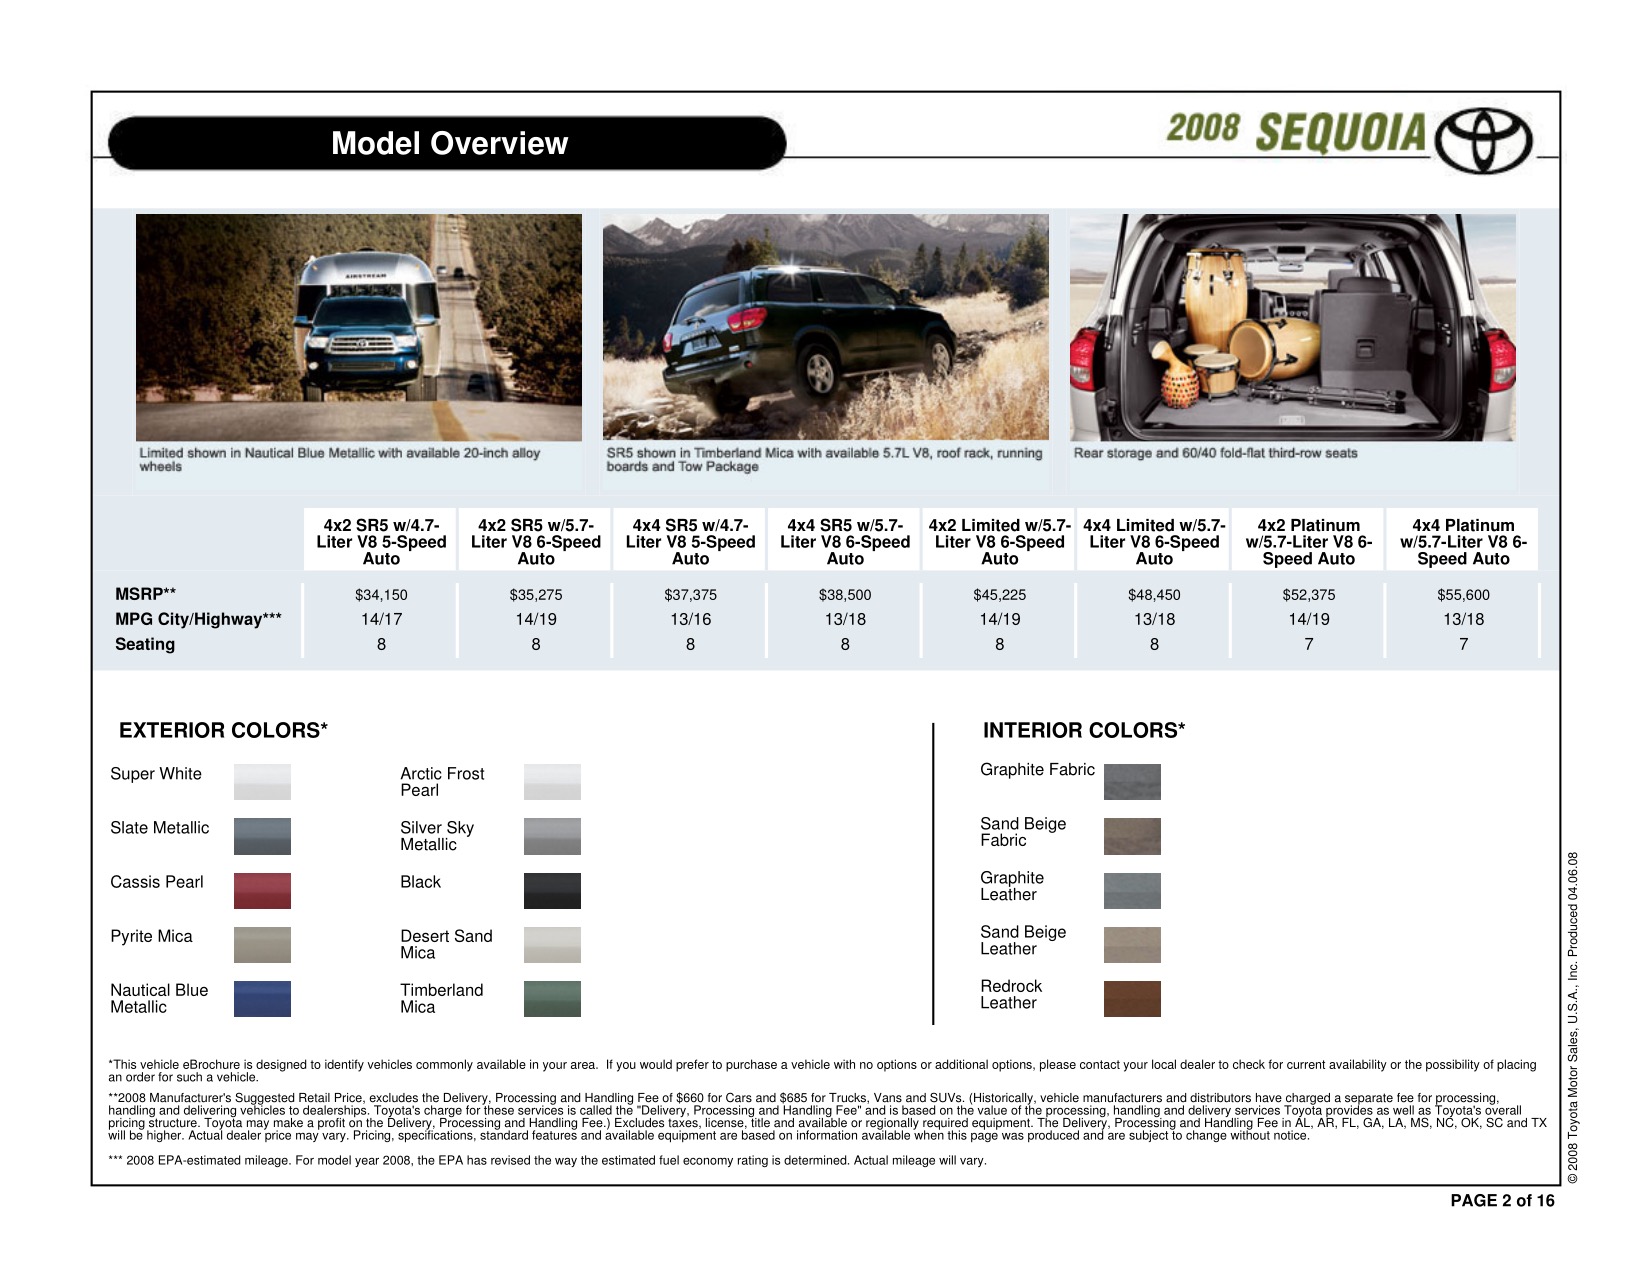 2009 Toyota Sequoia Brochure Page 5